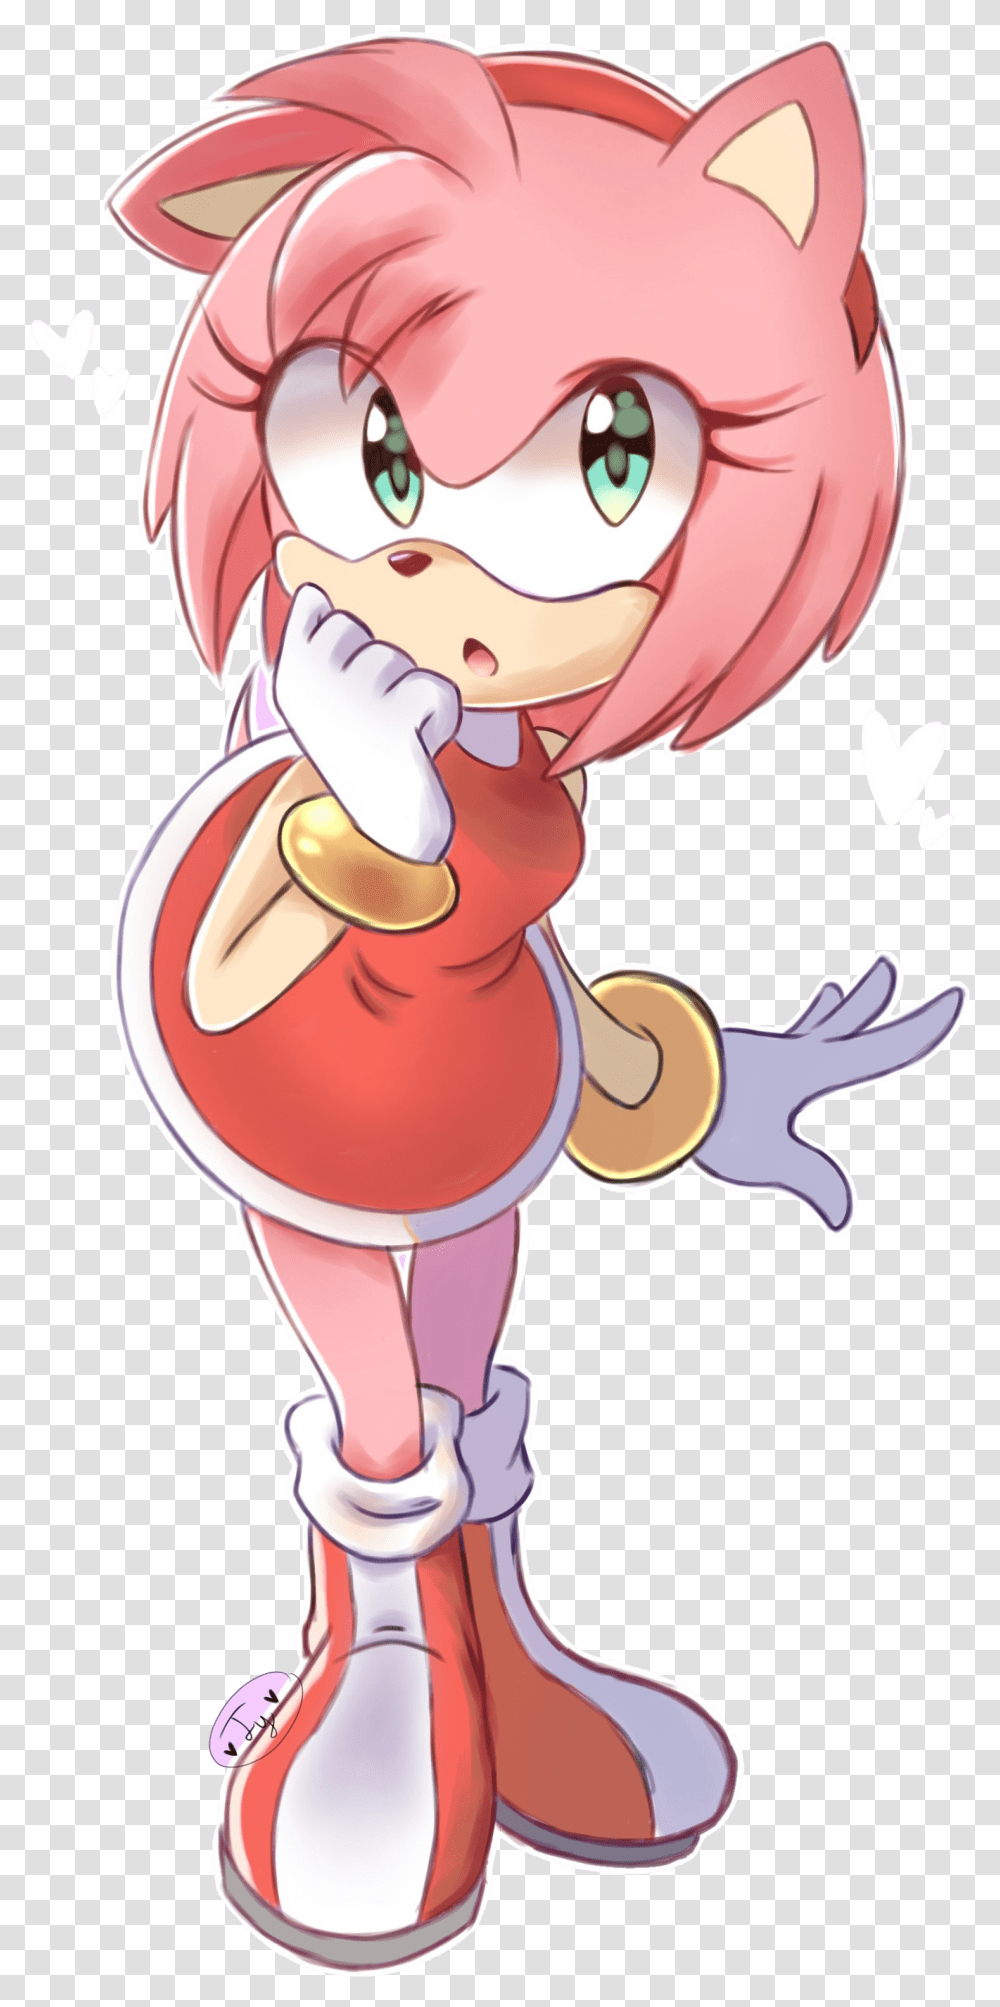 Amy Rose Background Amy Rose With Long Hair, Toy, Hand, Stomach, Food Transparent Png